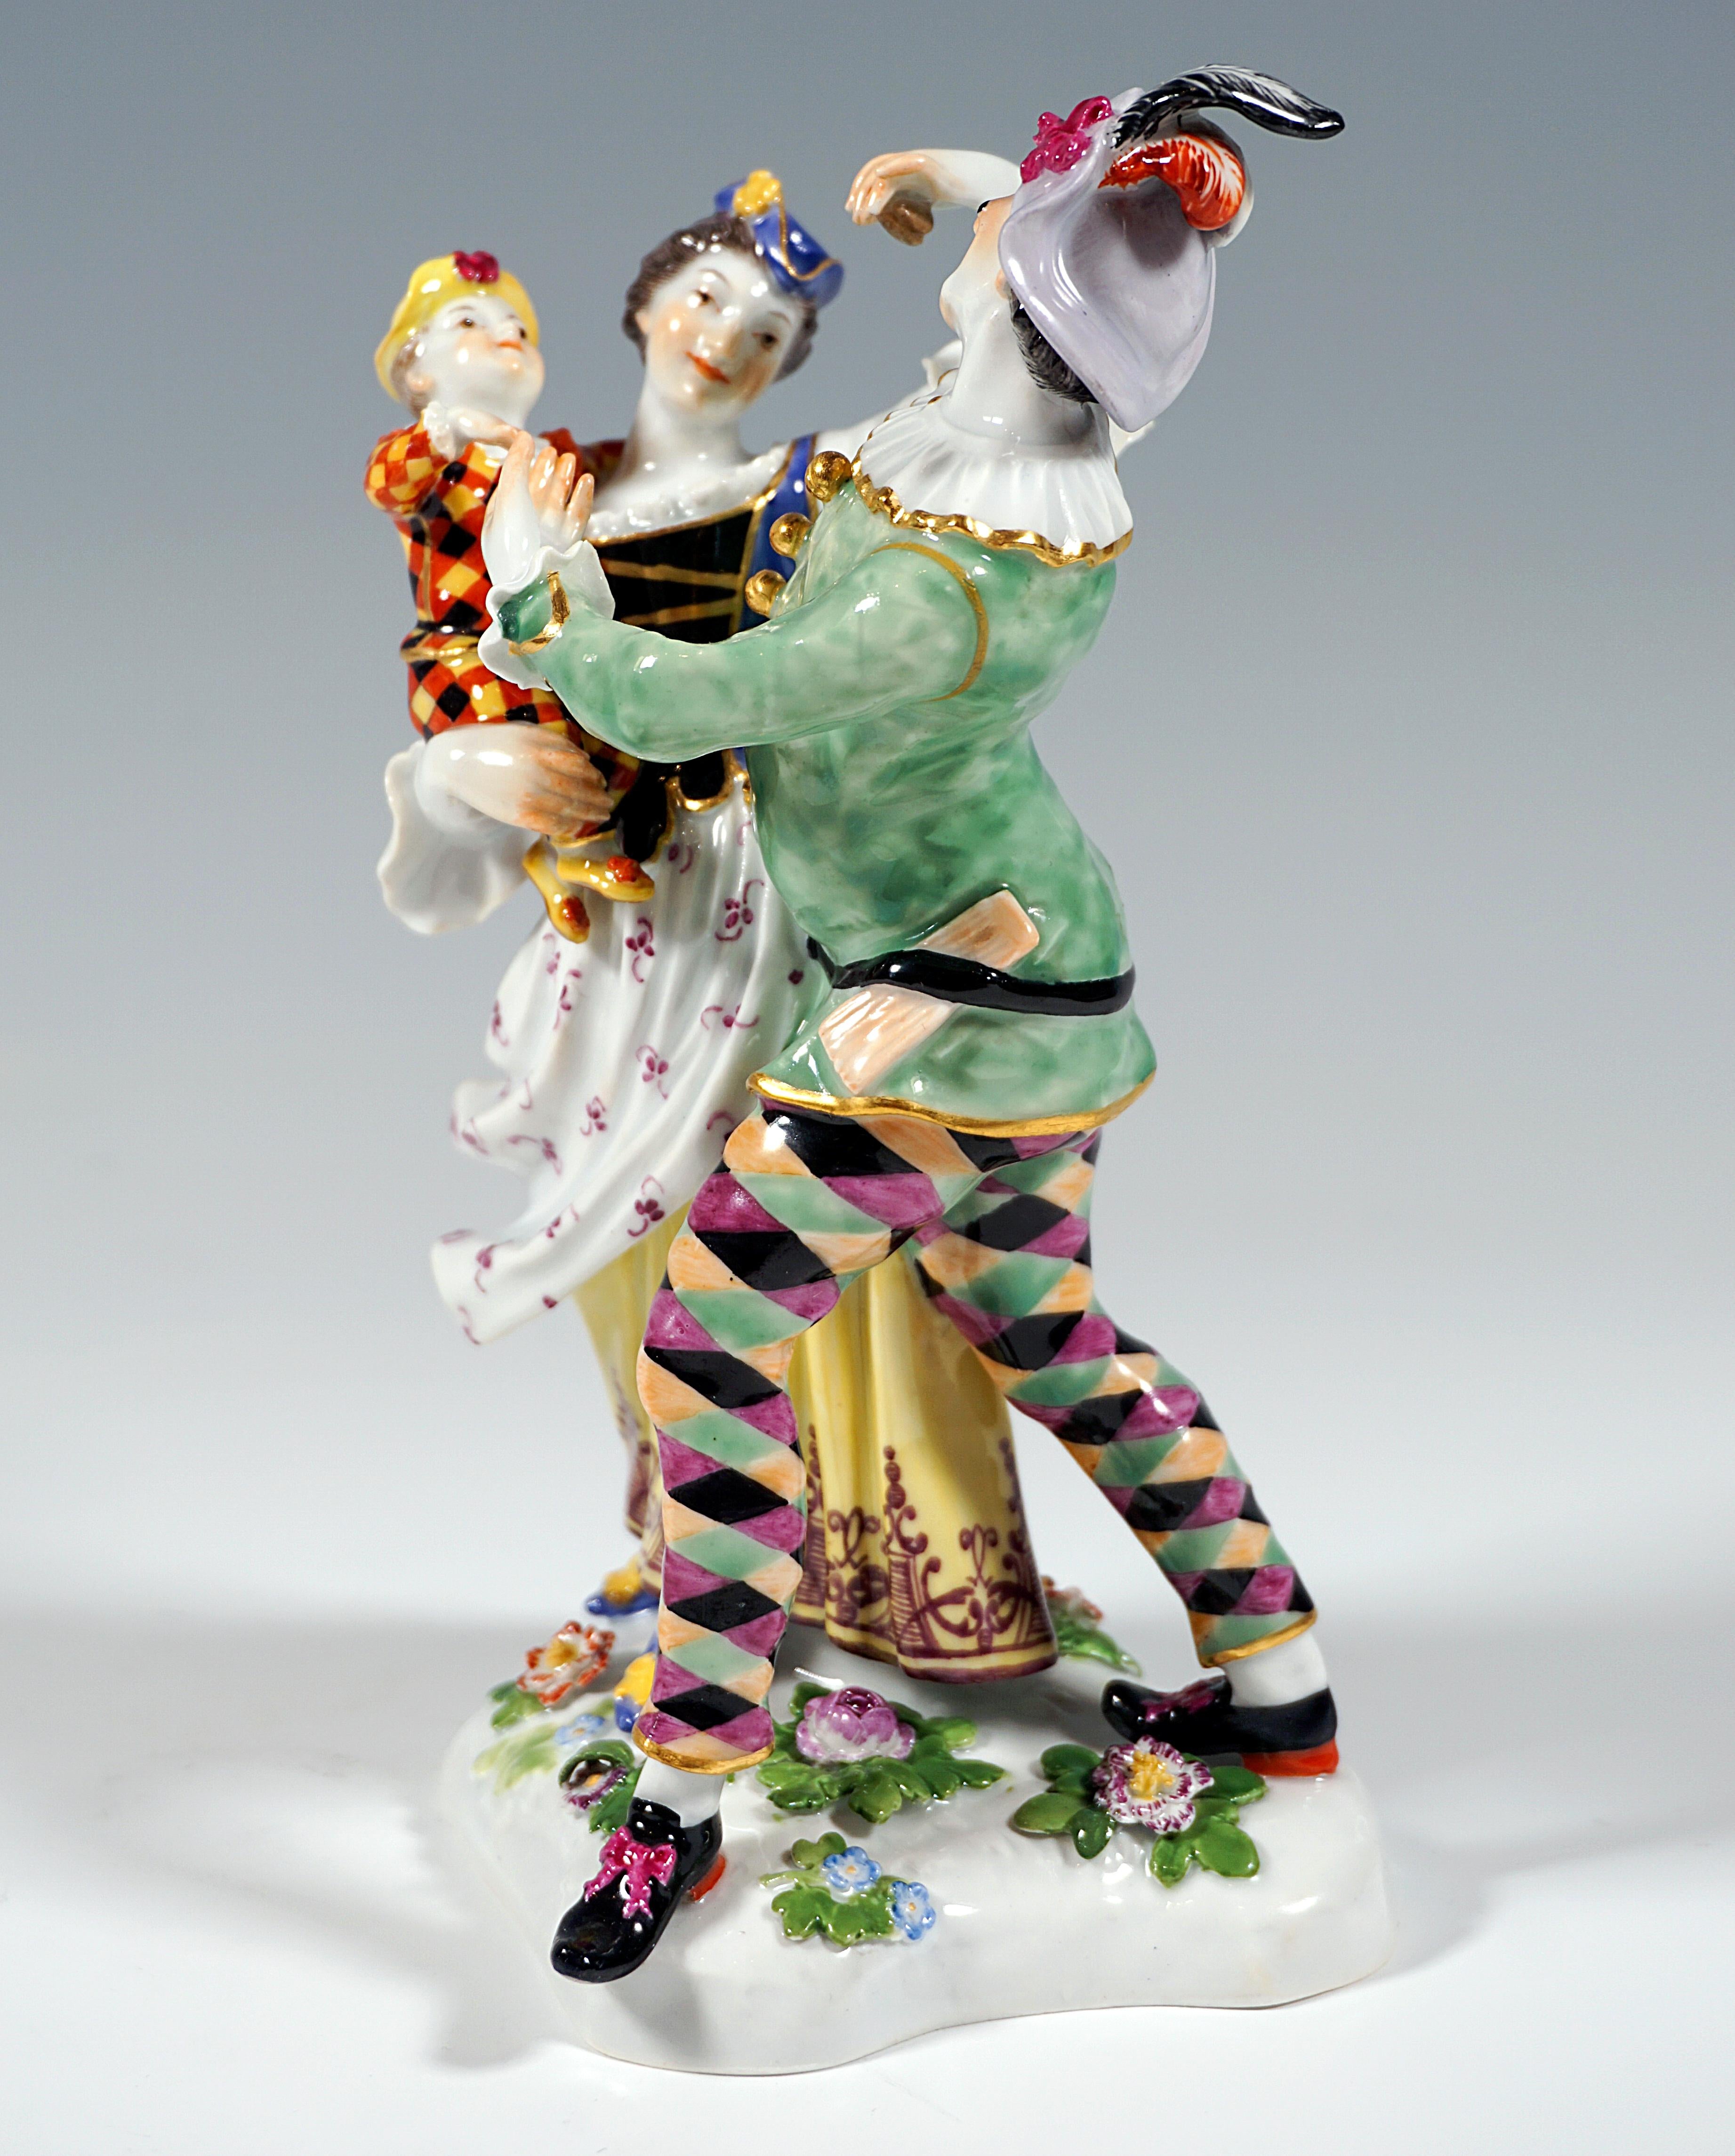 Very rare Commedia dell'Arte figure group from the 19th century:
Harlequin and Columbine with child dancing in a circle: Harlequin in green jacket with golden buttons and white ruff and colorful diamond trousers, on his head a feathered hat,